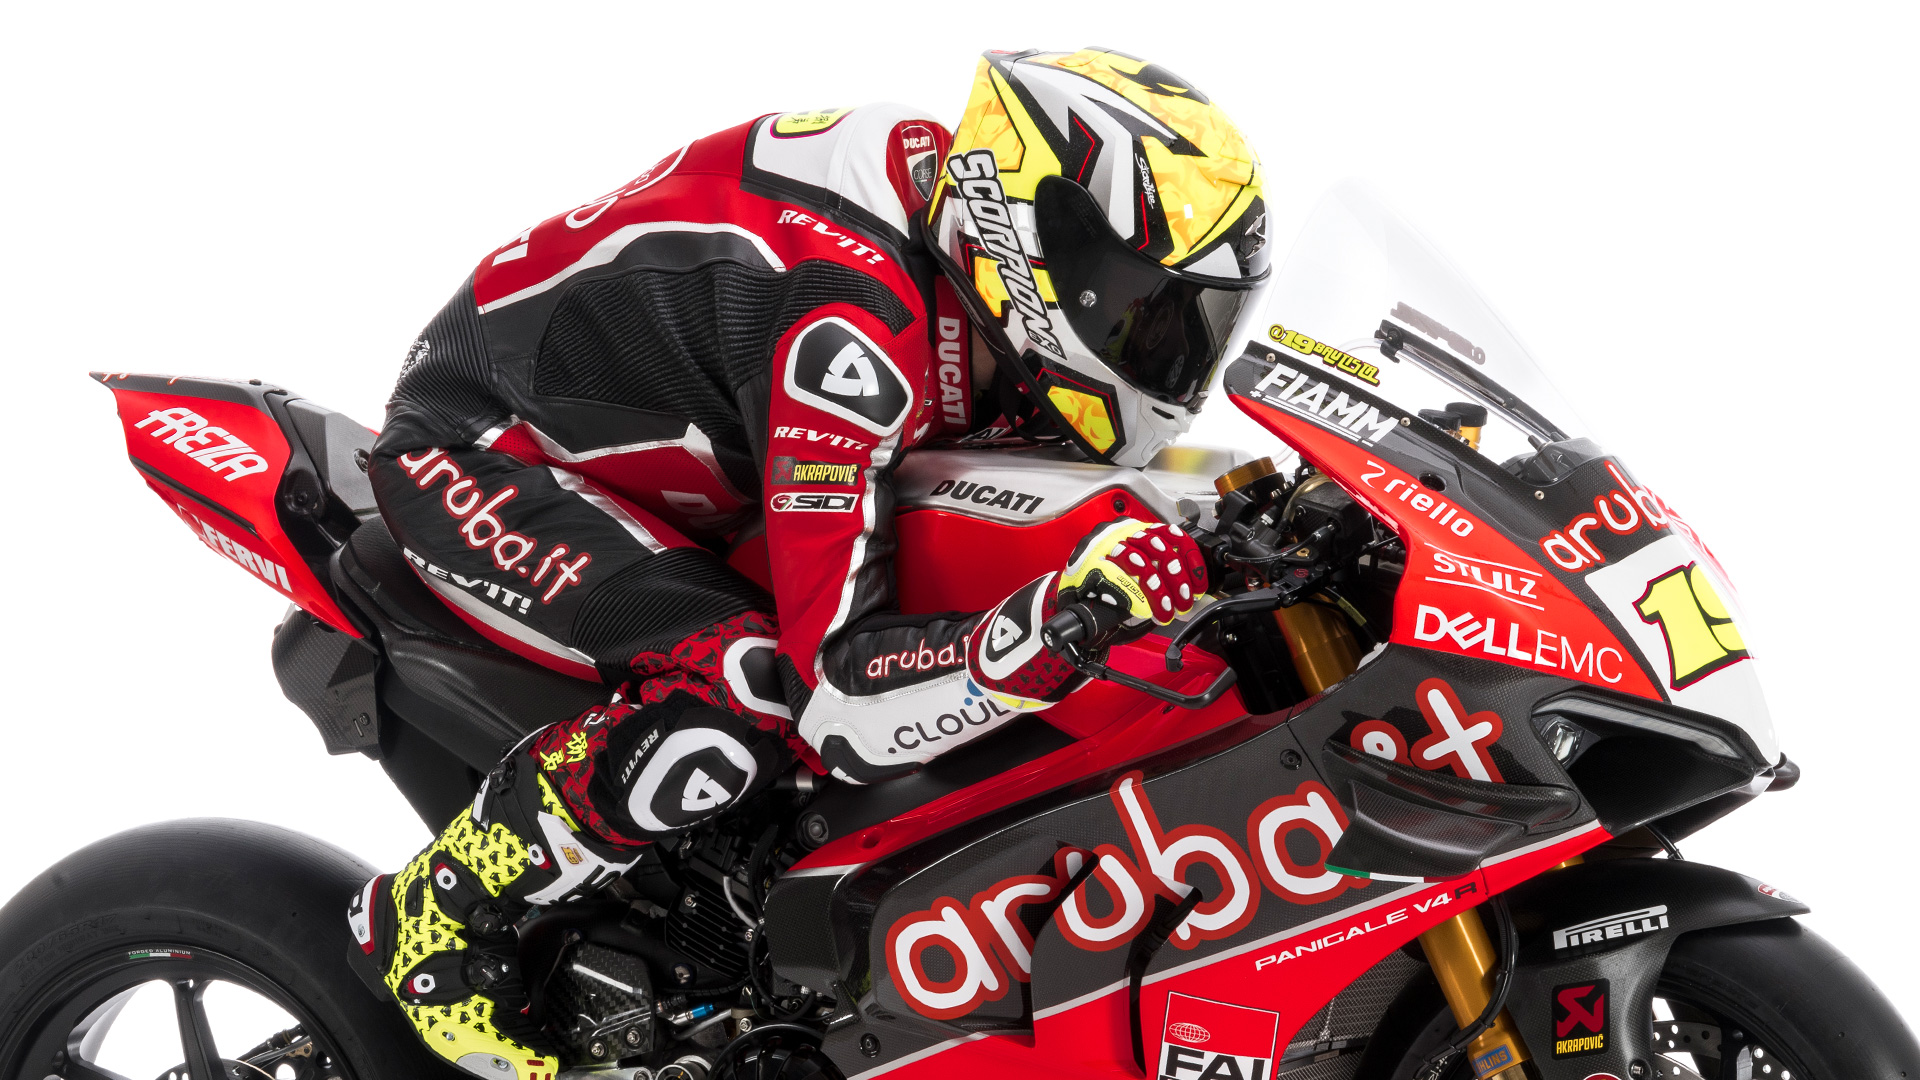 Wsbk Ducati S Worry Increases Adrenaline Culture Of Motorcycle And Speed